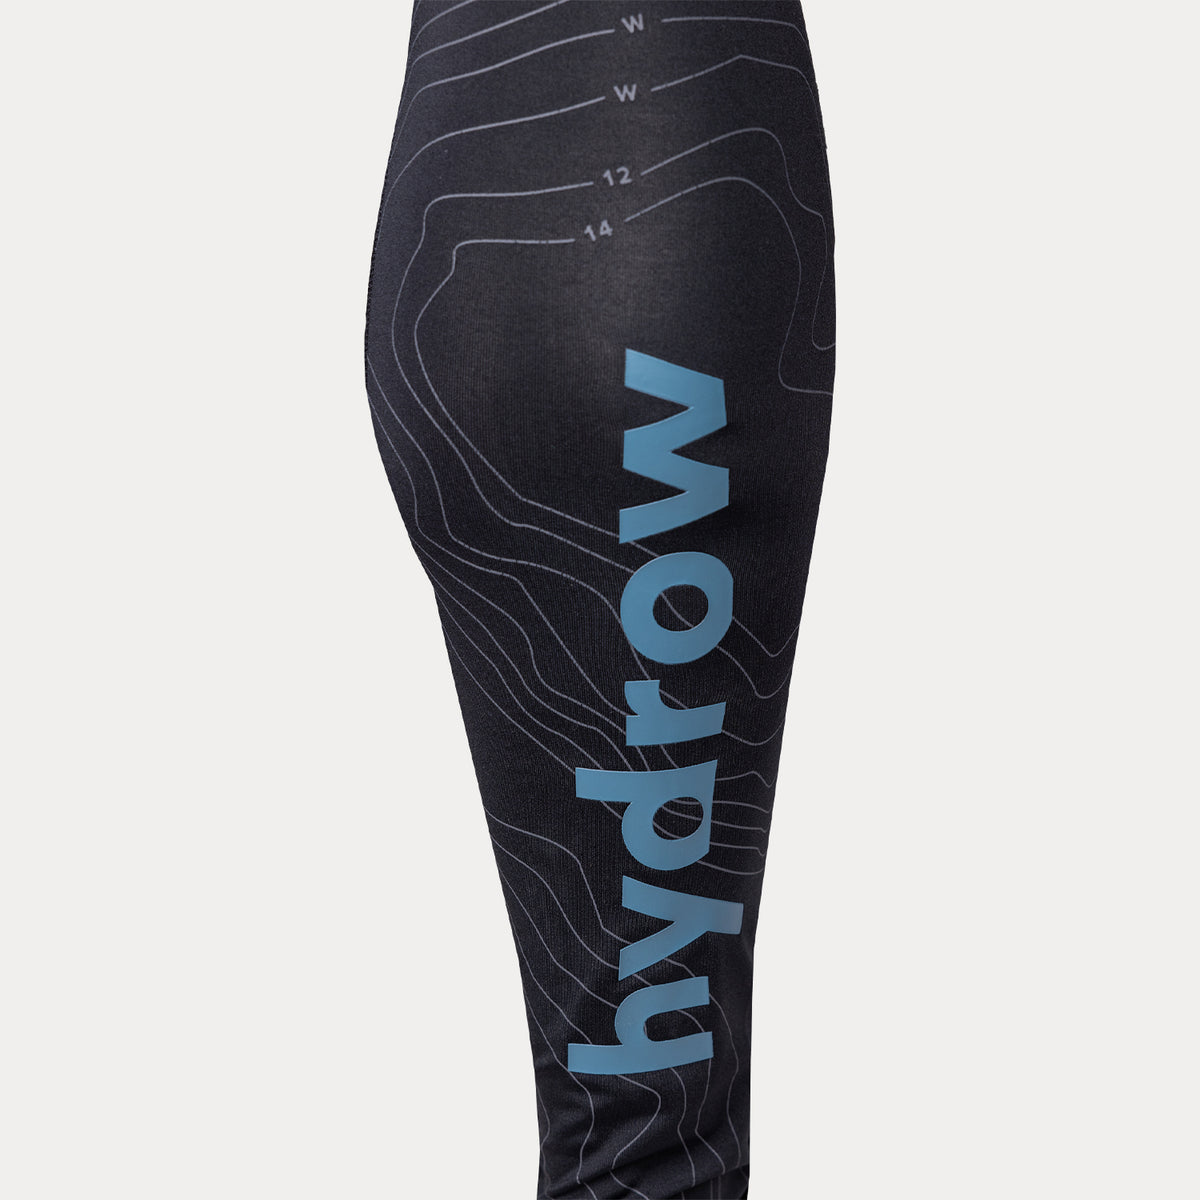 right rear calf of active compression tights showing &quot;hydrow&quot; logo